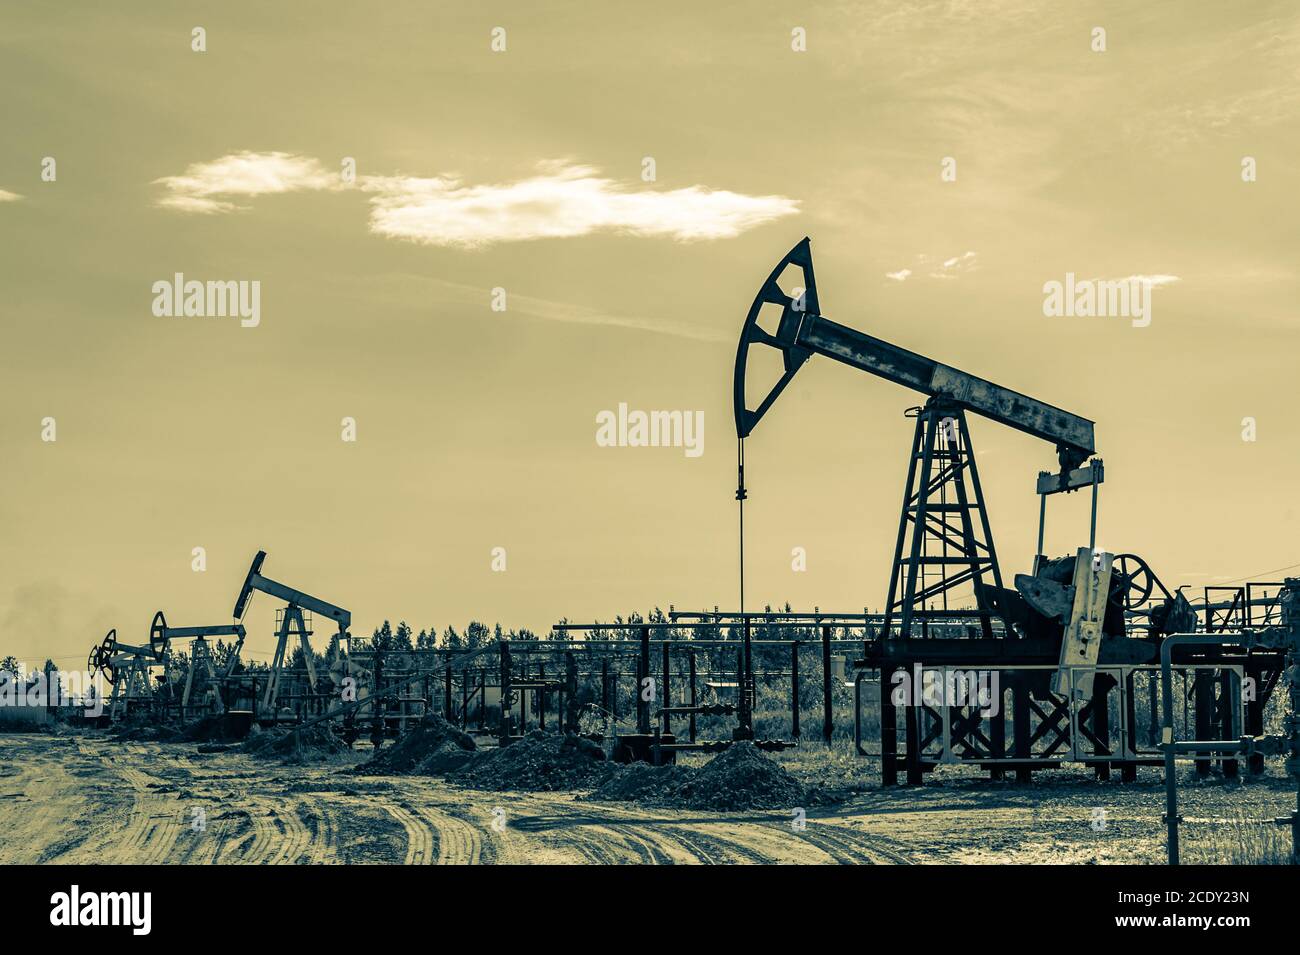 Petroleum concept. Oil pump rig. Oil and gas production. Oilfield site. Pump Jack are running. Drilling derricks for fossil fuel Stock Photo